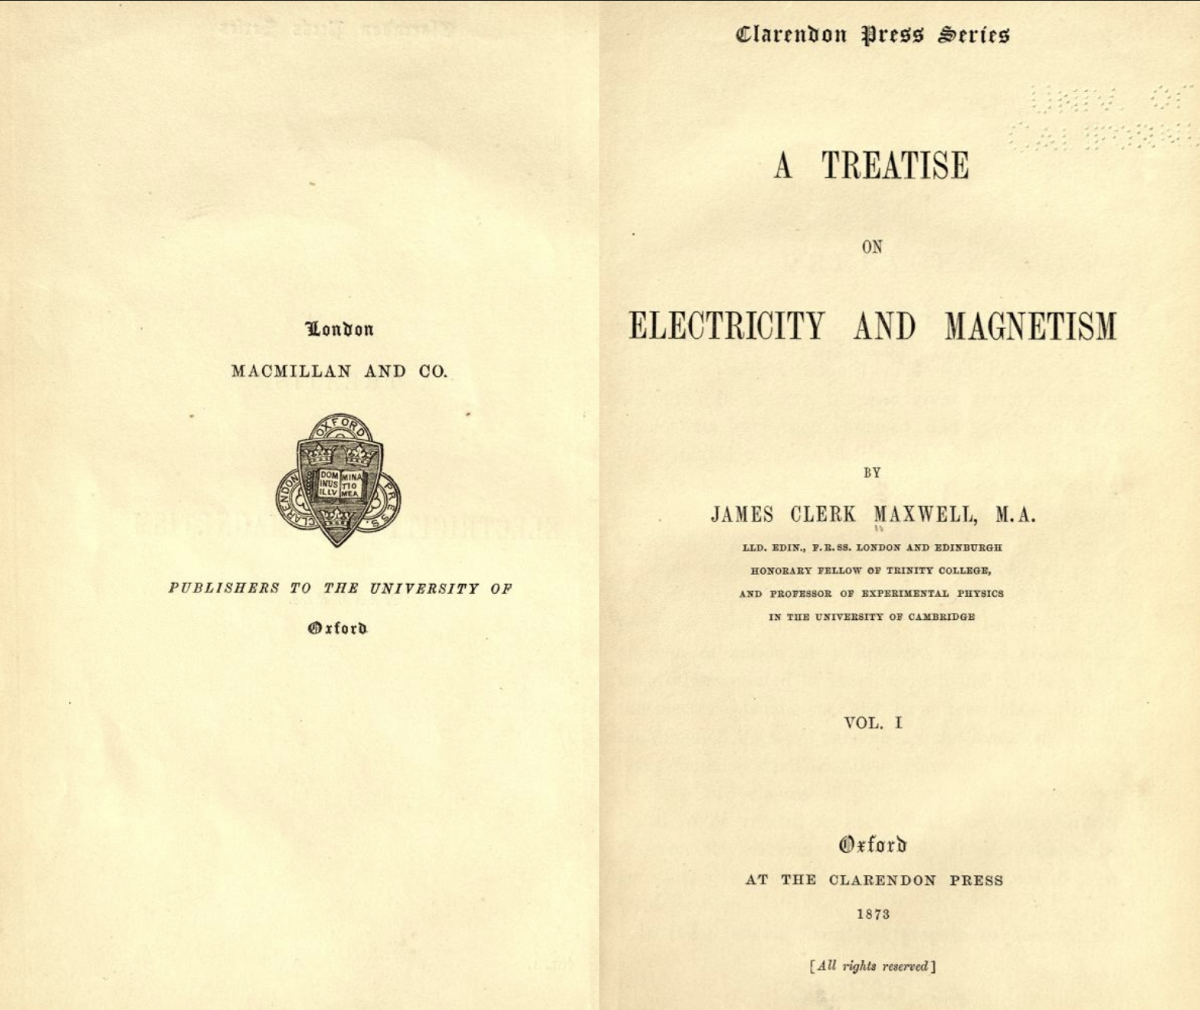 Title page of volume 1 of James Clerk Maxwell's 1873 Treatise on Electricity and Magnetism.